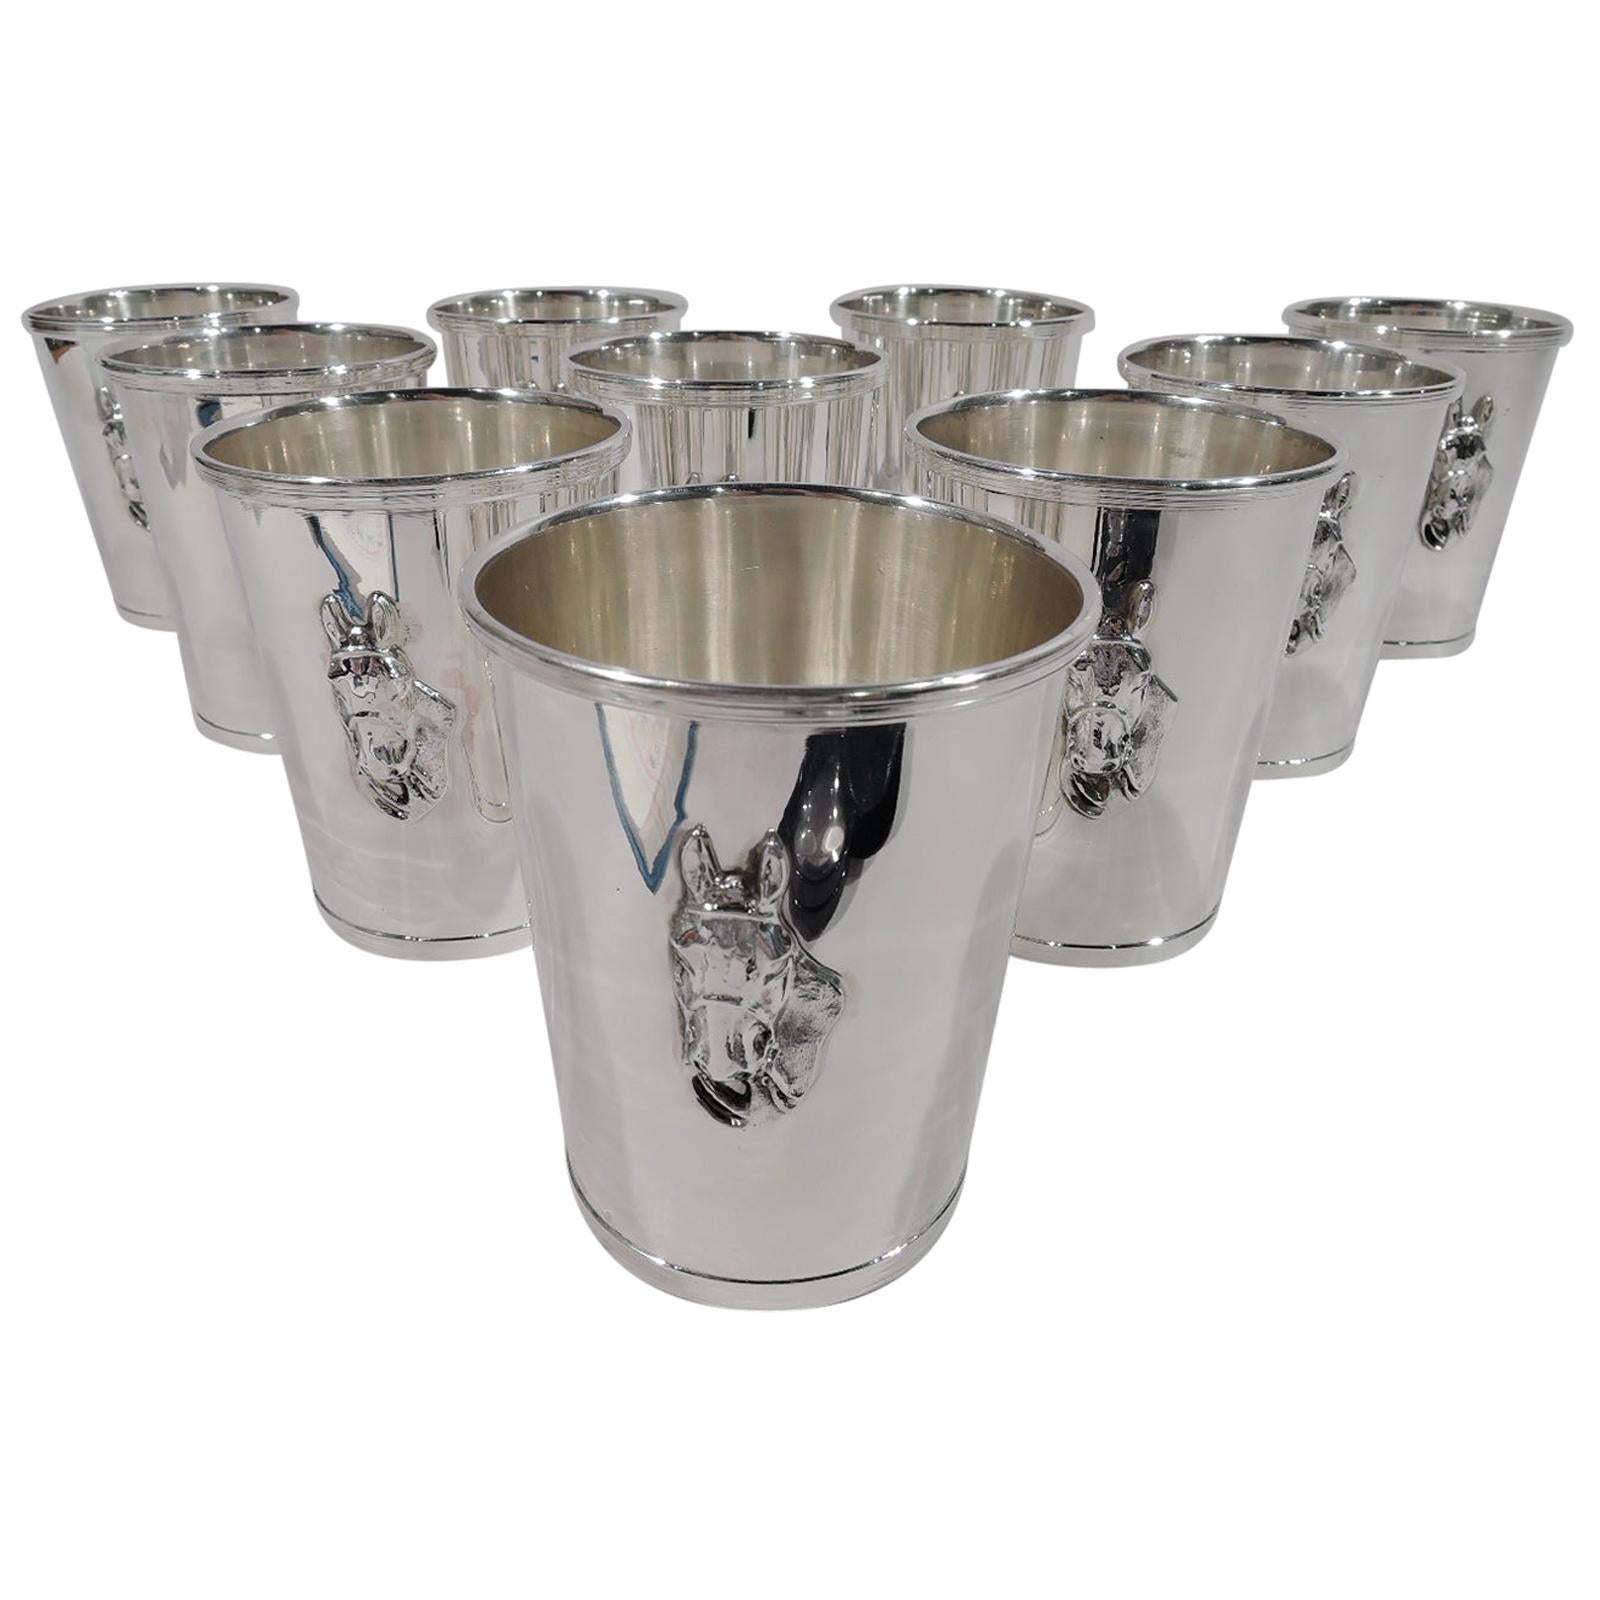 Set of 10 American Modern Sterling Silver Mint Juleps with Horse Head